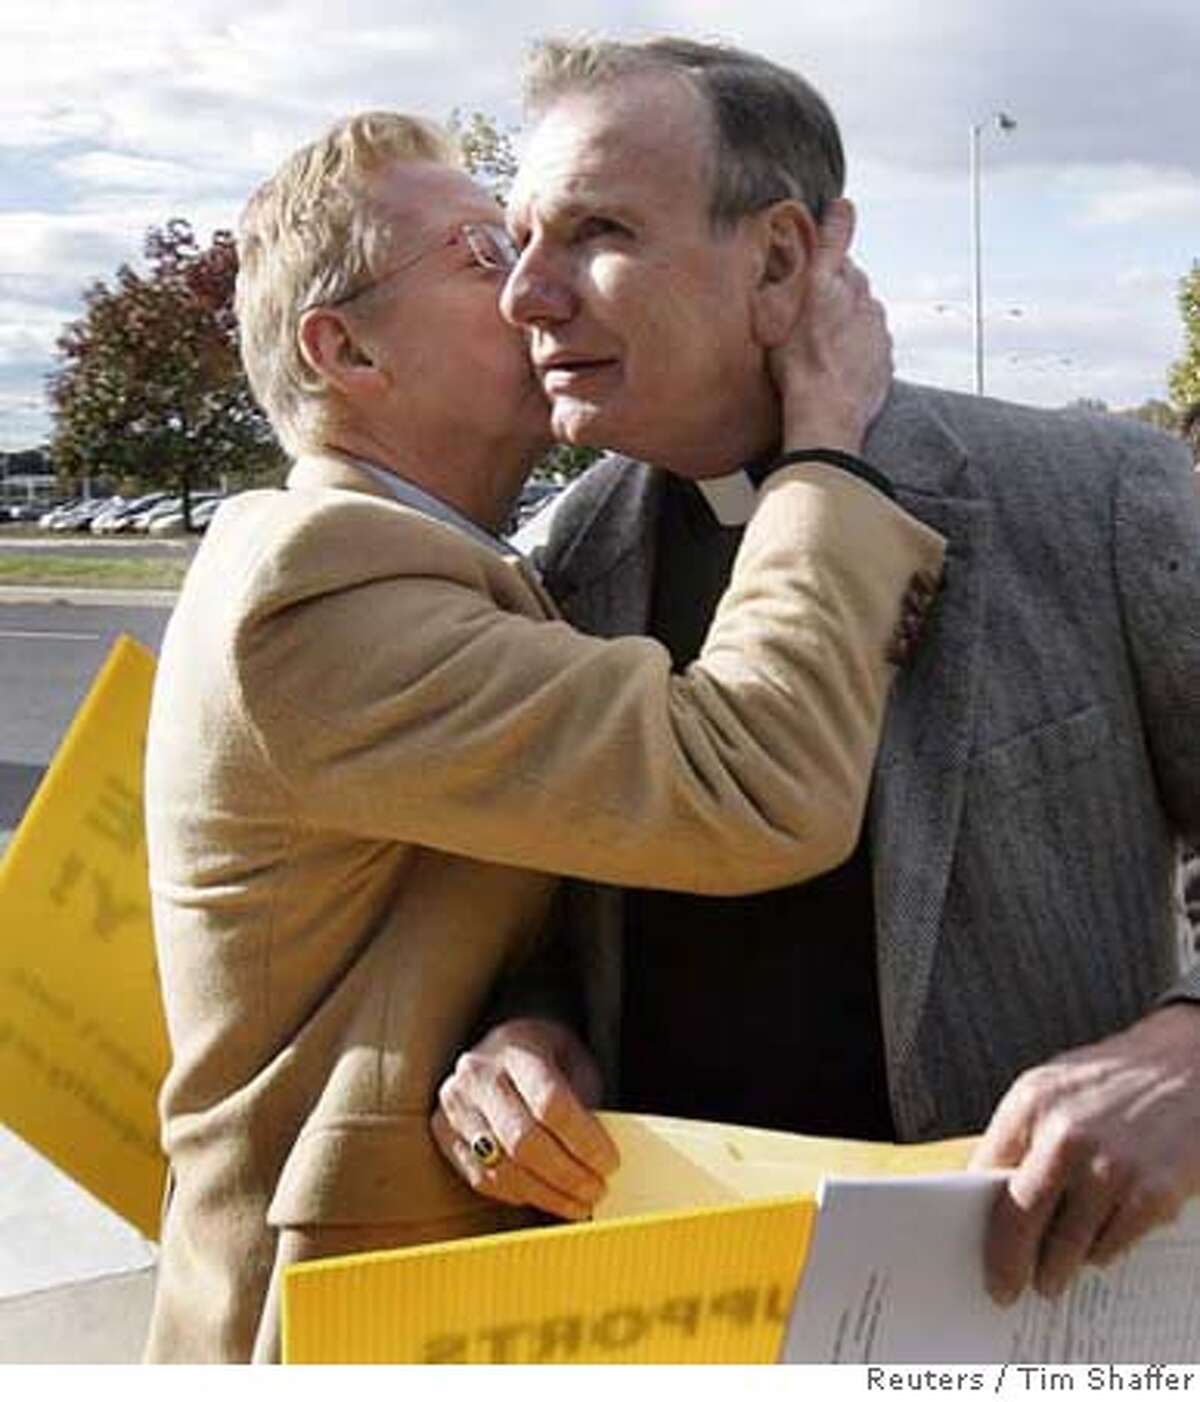 Lutheran minister Robert Kreisat (R) is embraced by his partner of 37 years Edward Mather after hearing the New Jersey Supreme court decision on same-sex marriage in front of the Supreme court building in Trenton, New Jersey, October 25, 2006. Saying that times have changed, New Jersey's highest court on Wednesday guaranteed gay couples the same rights as married heterosexual couples but left it to state lawmakers to define how the state wants to define marriage. REUTERS/ Tim Shaffer (UNITED STATES) 0